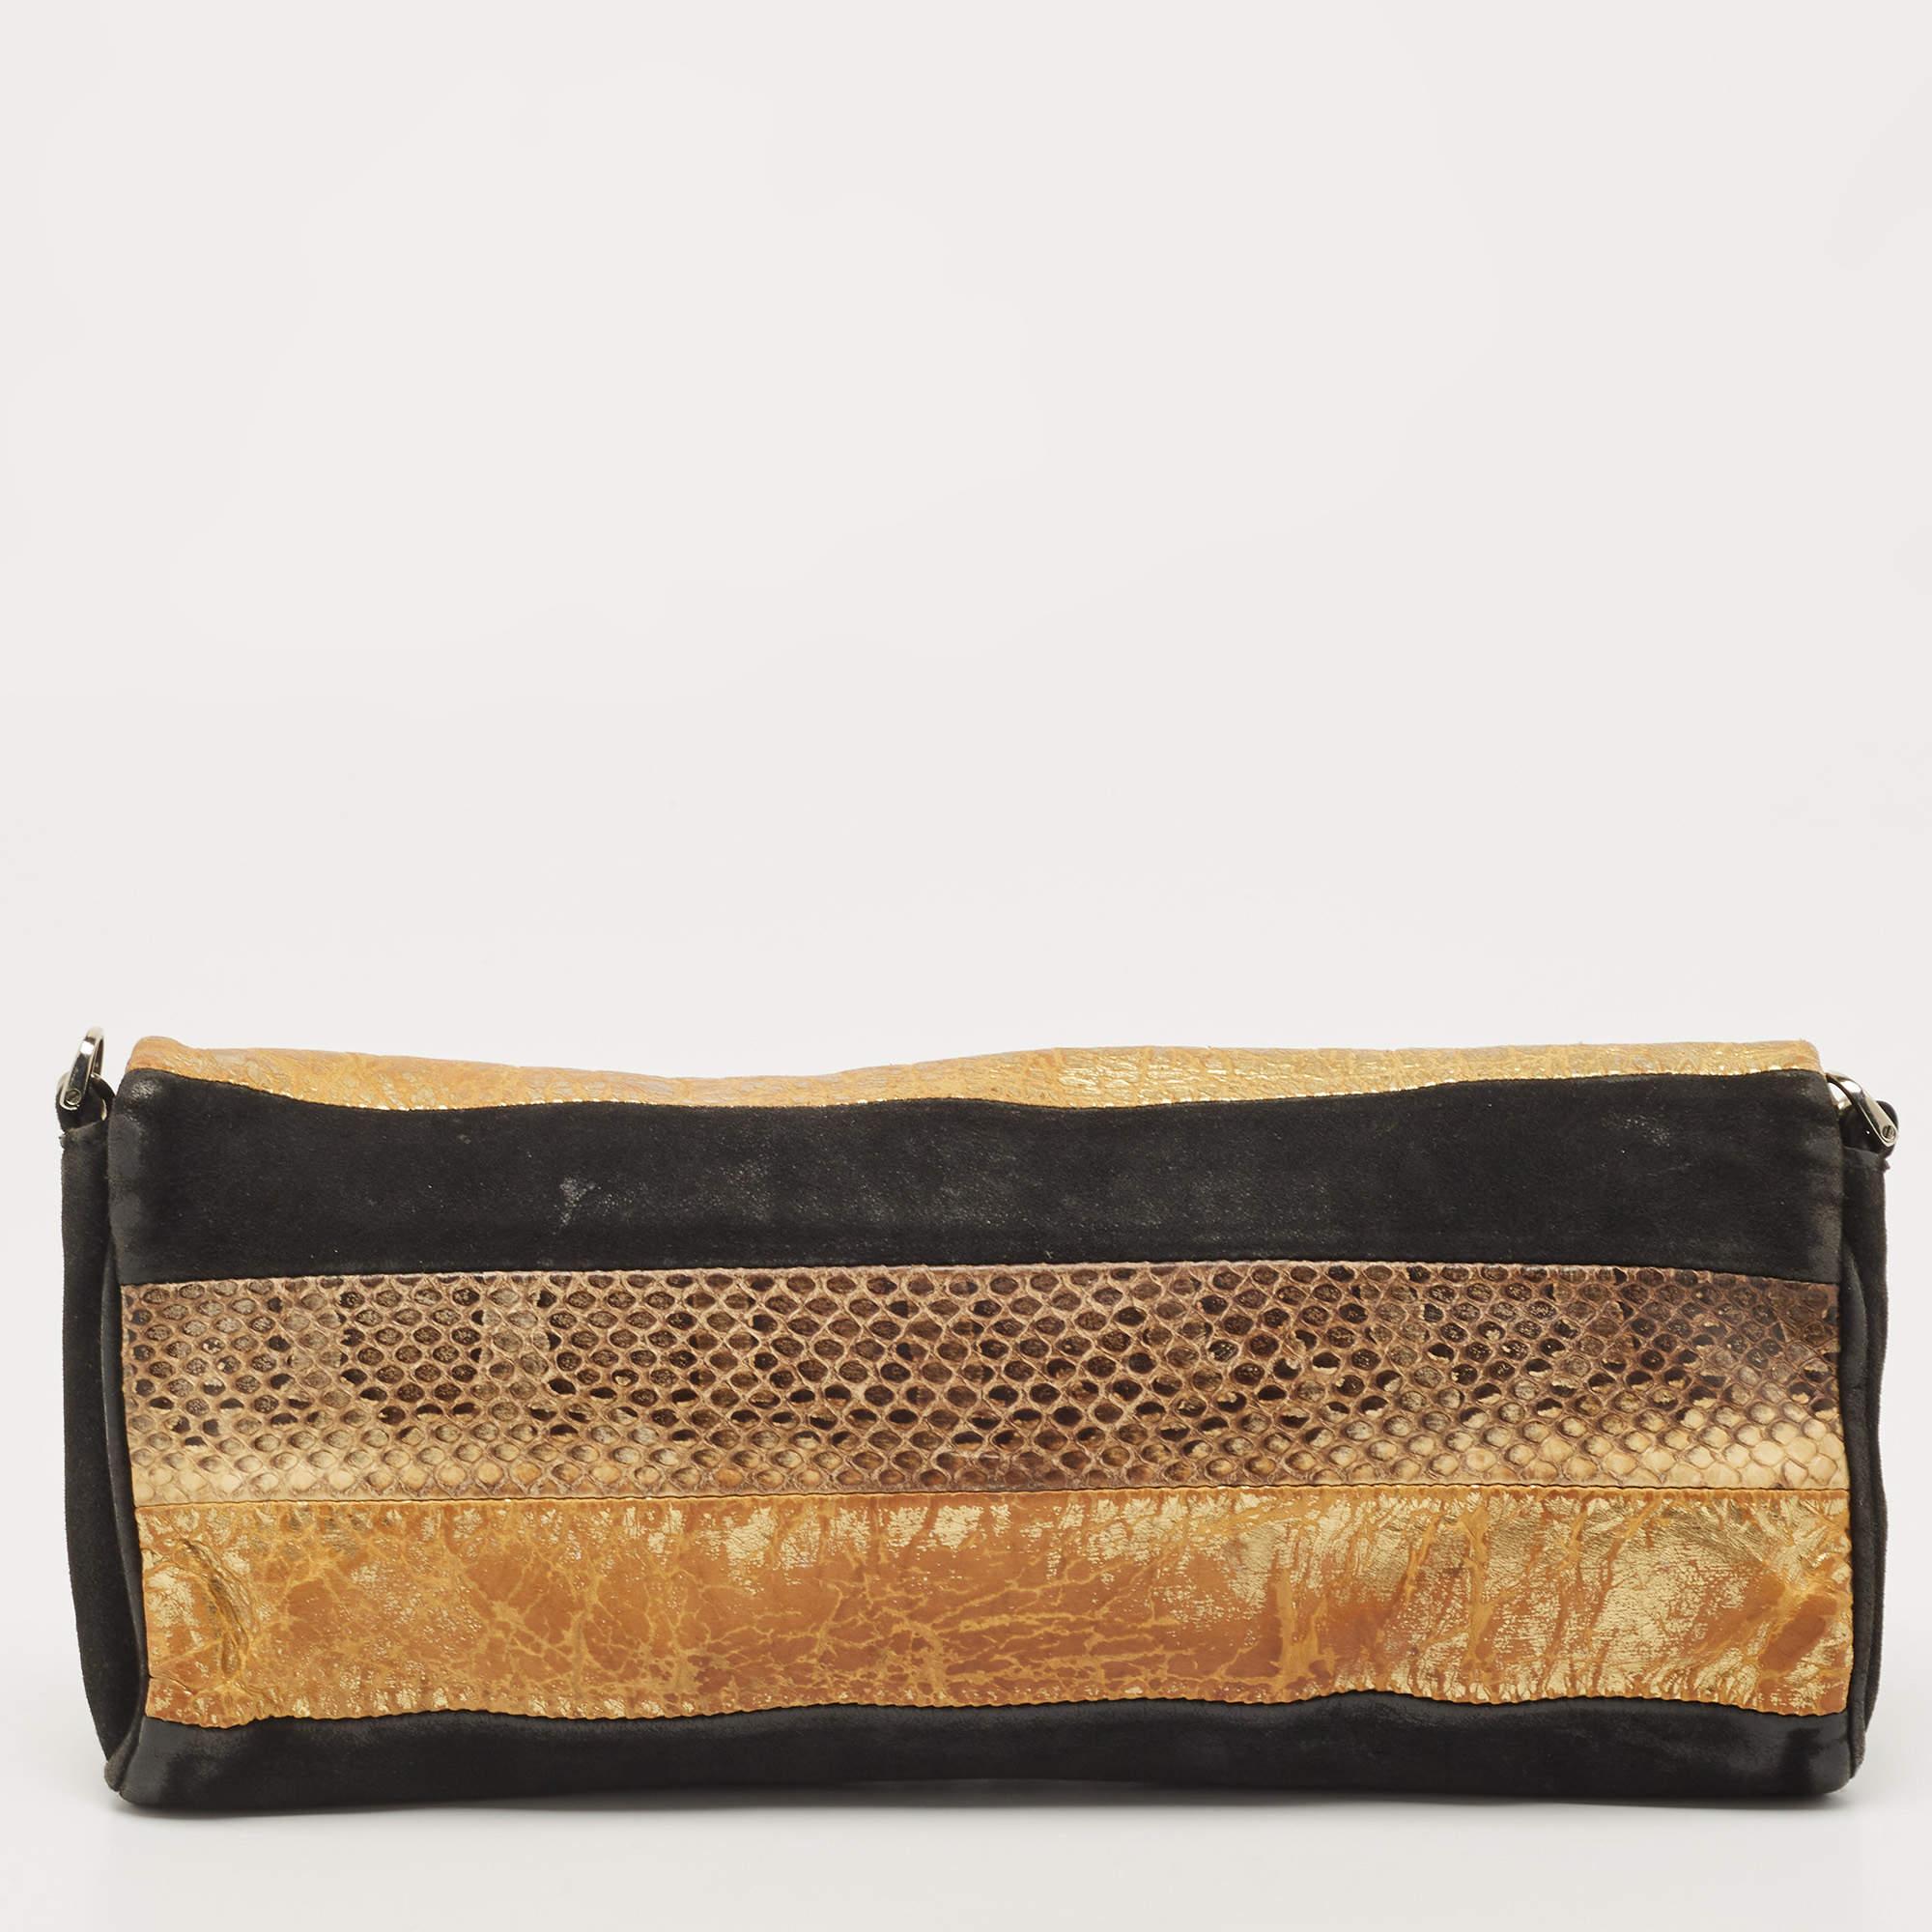 Dolce & Gabbana Black/Brown Suede And Snakeskin Leather Chain Clutch For Sale 10